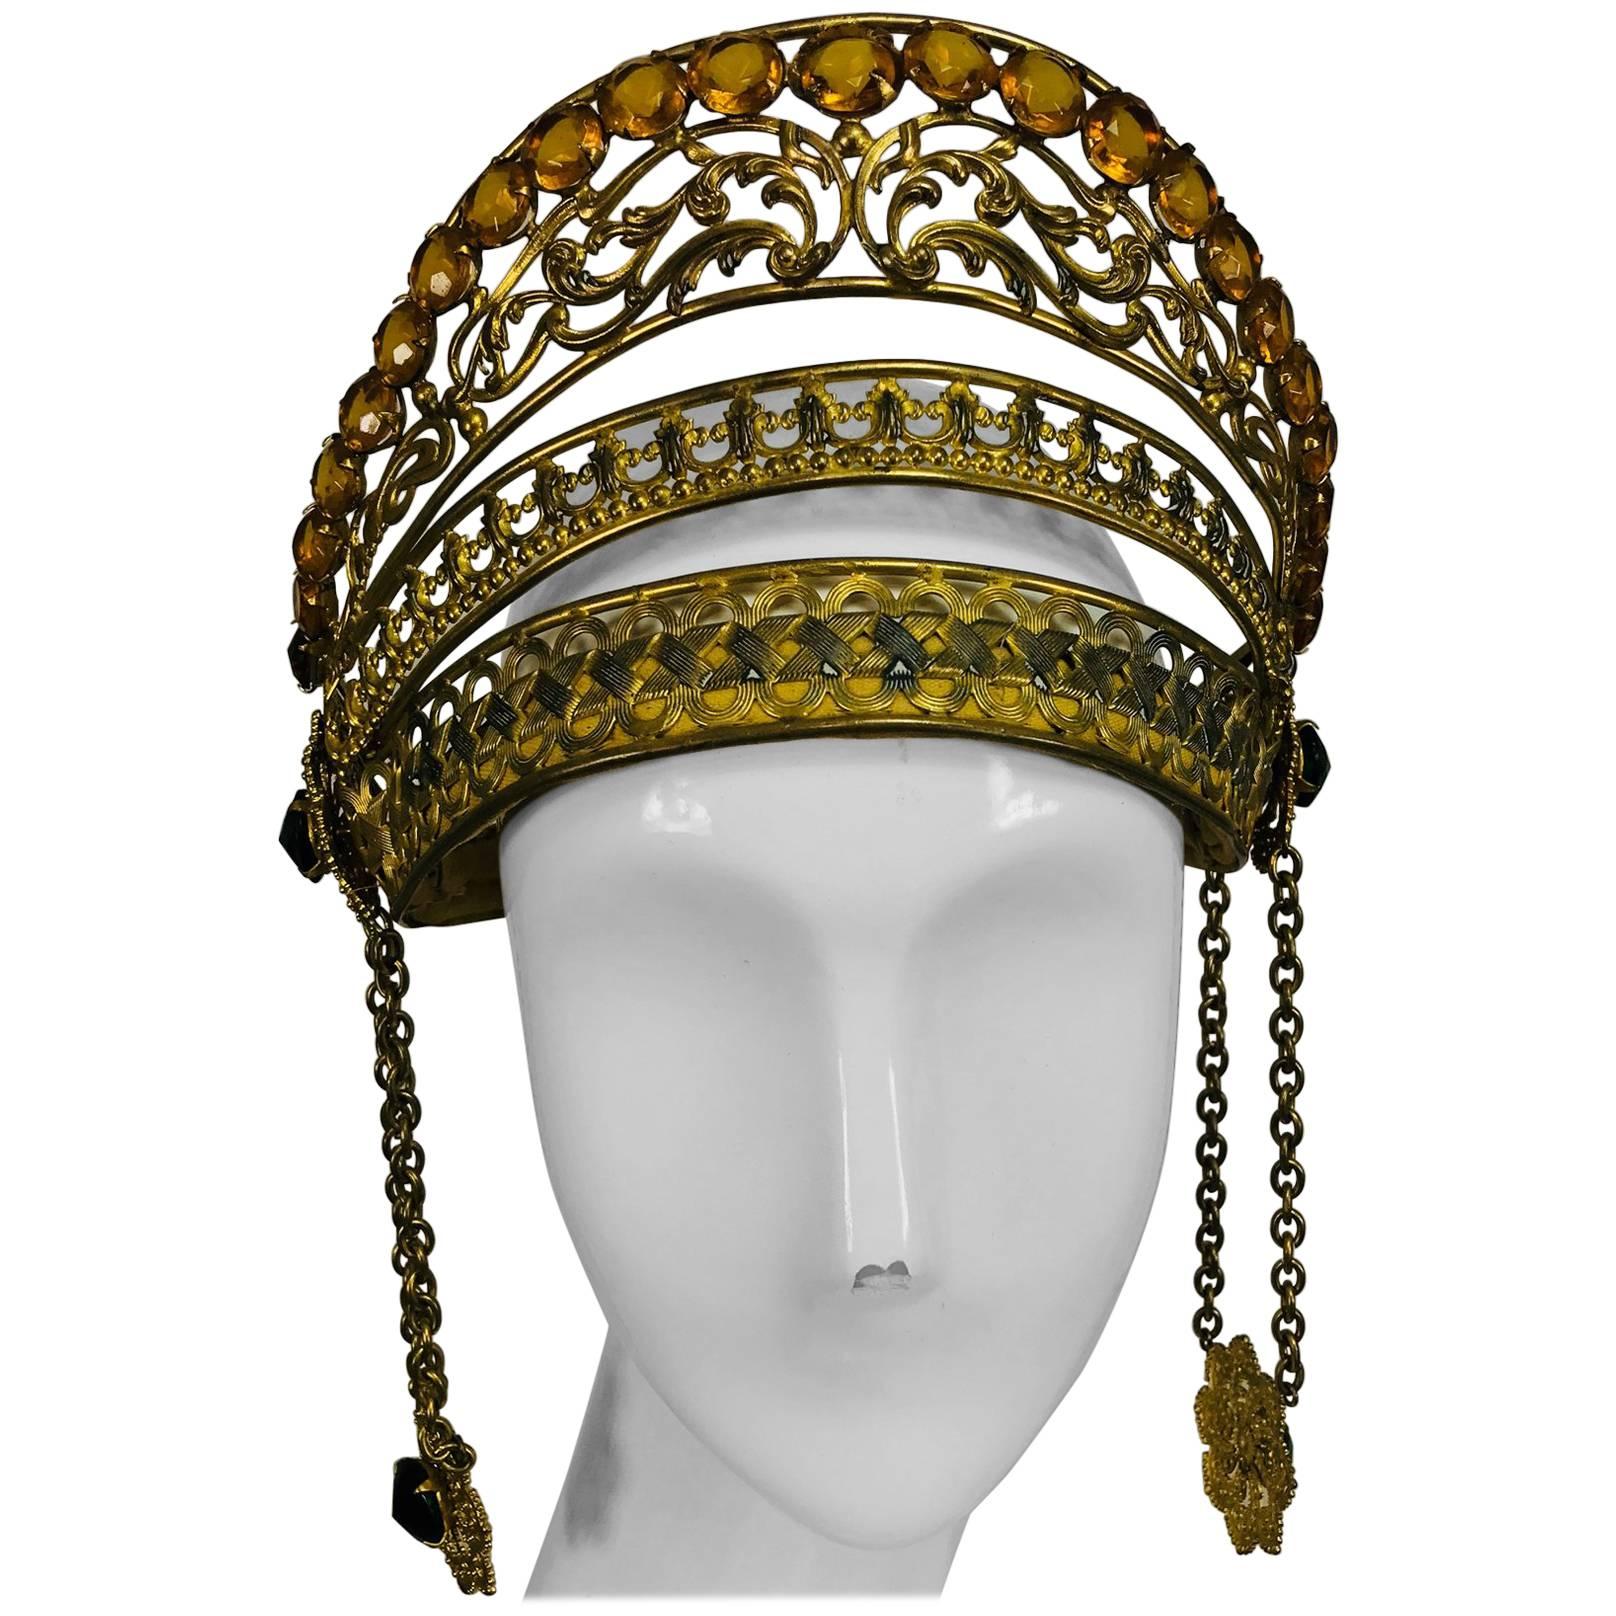 Rare Crown headdress gilt metal with jewels and side drops early 1900s